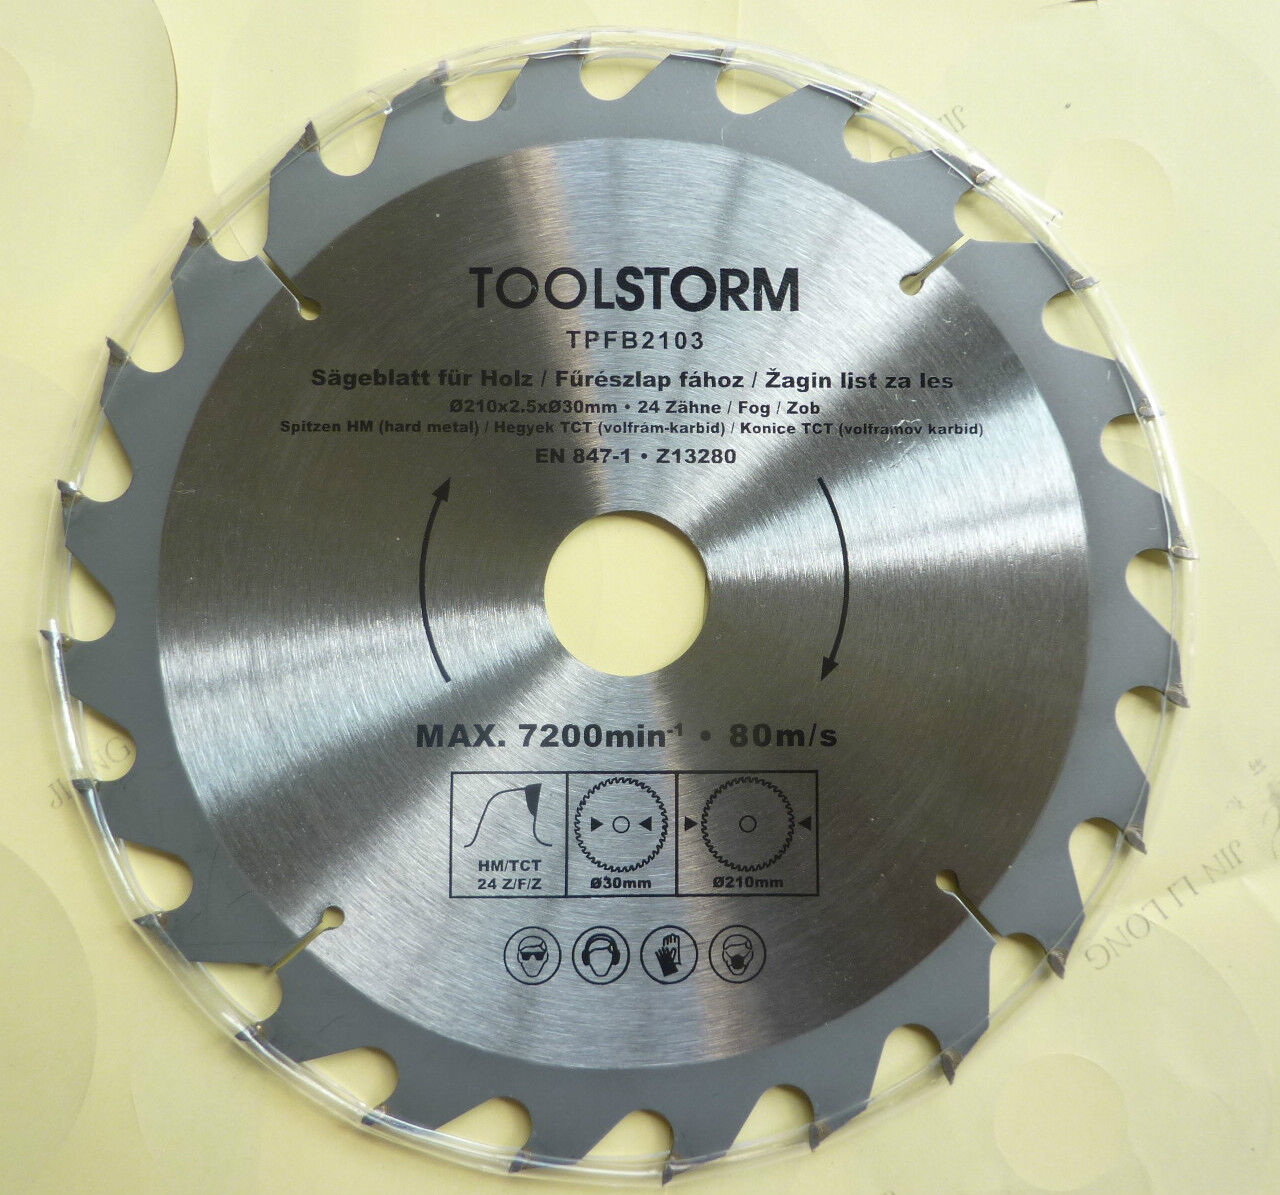 *3PC Circular Saw Blades 210mm 24T,48T,60Teeth 30MM BORE With 3 Reduction TCT